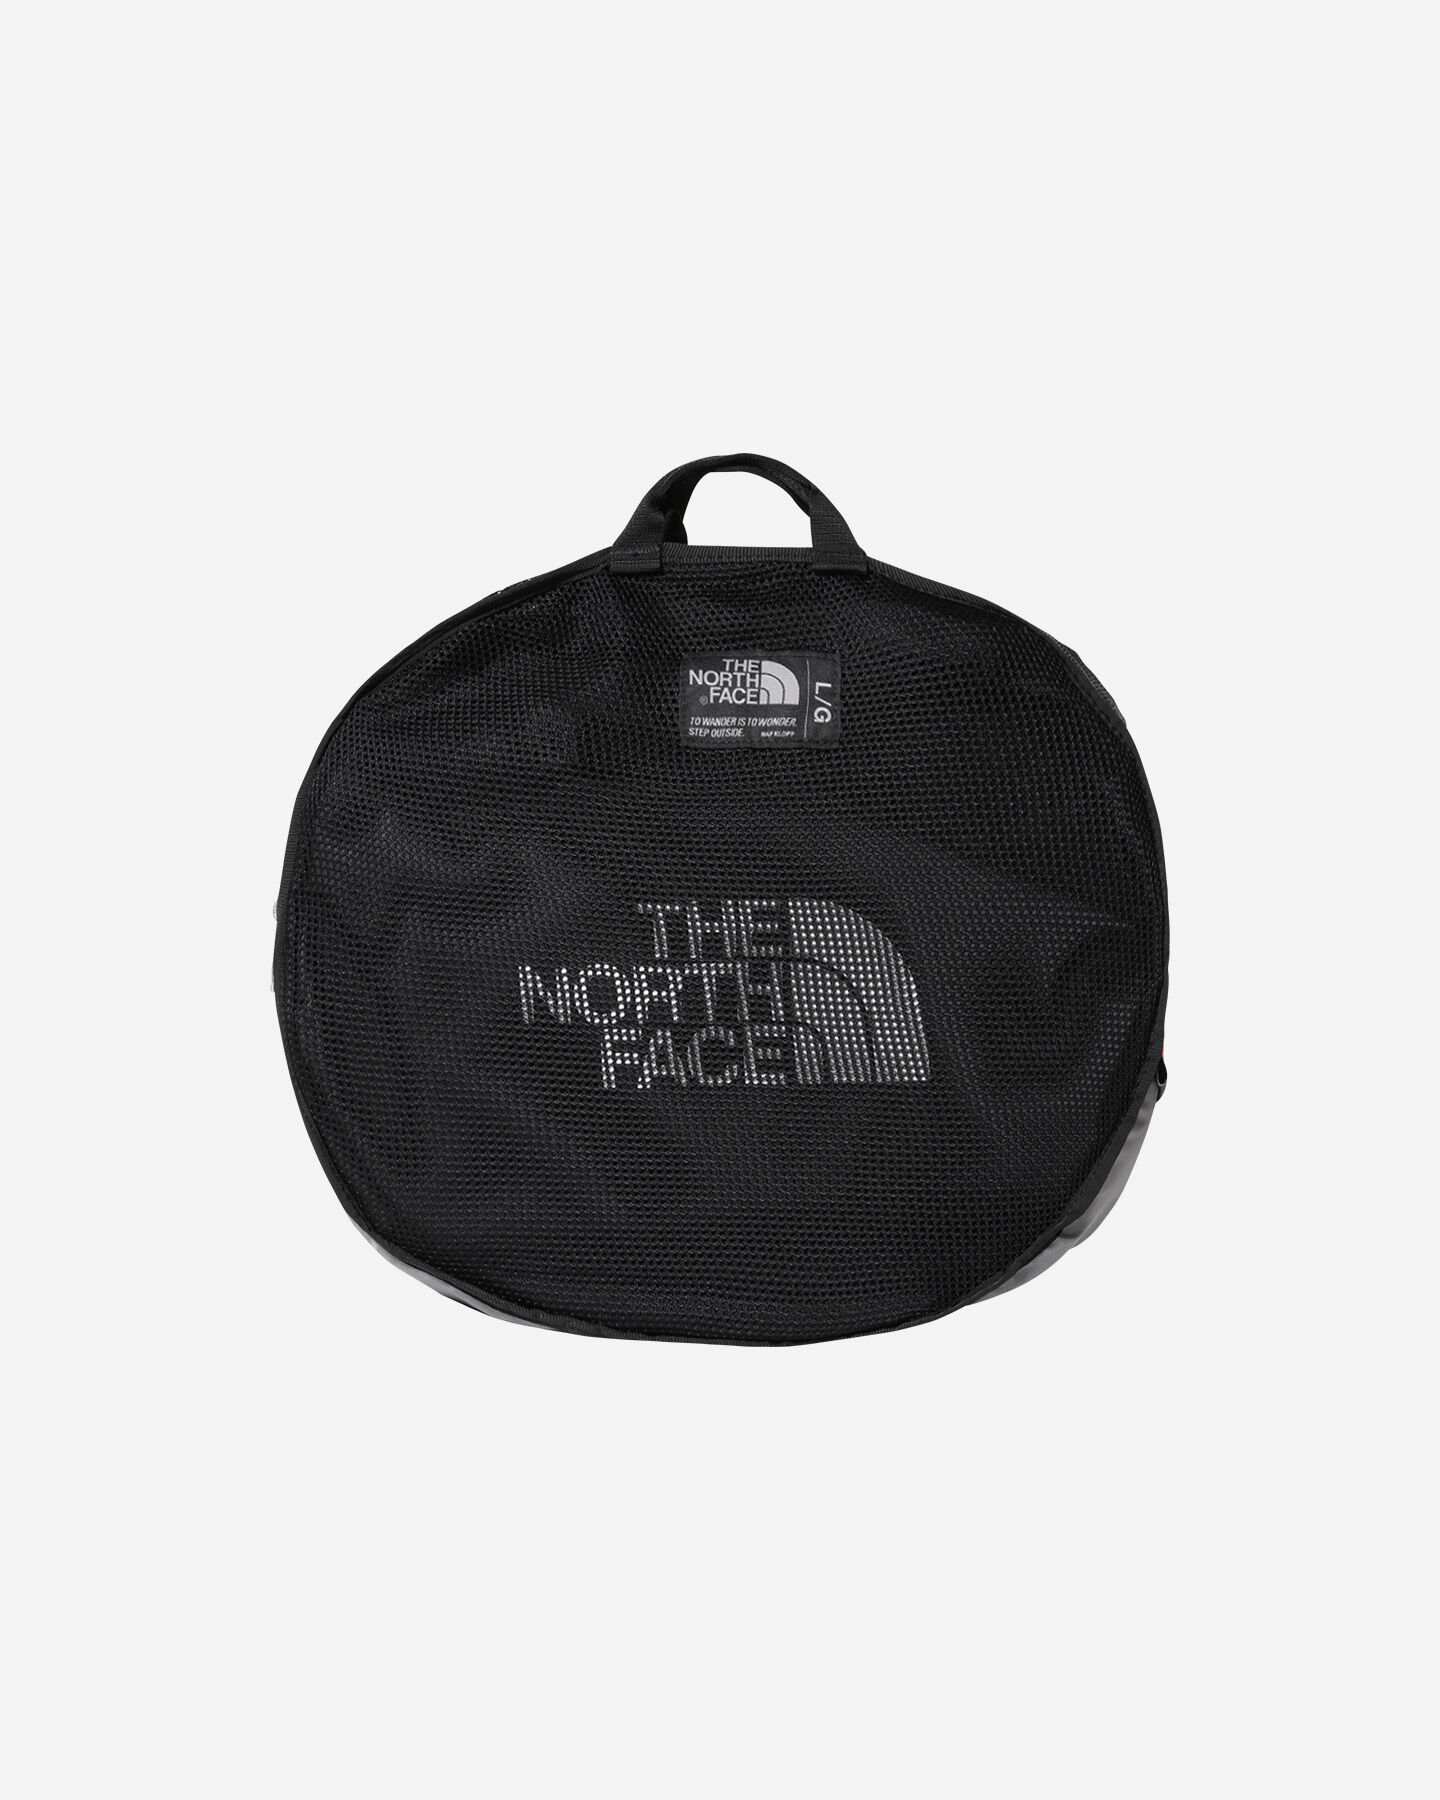  Borsa THE NORTH FACE BASE CAMP DUFFEL LARGE S5347748 scatto 3